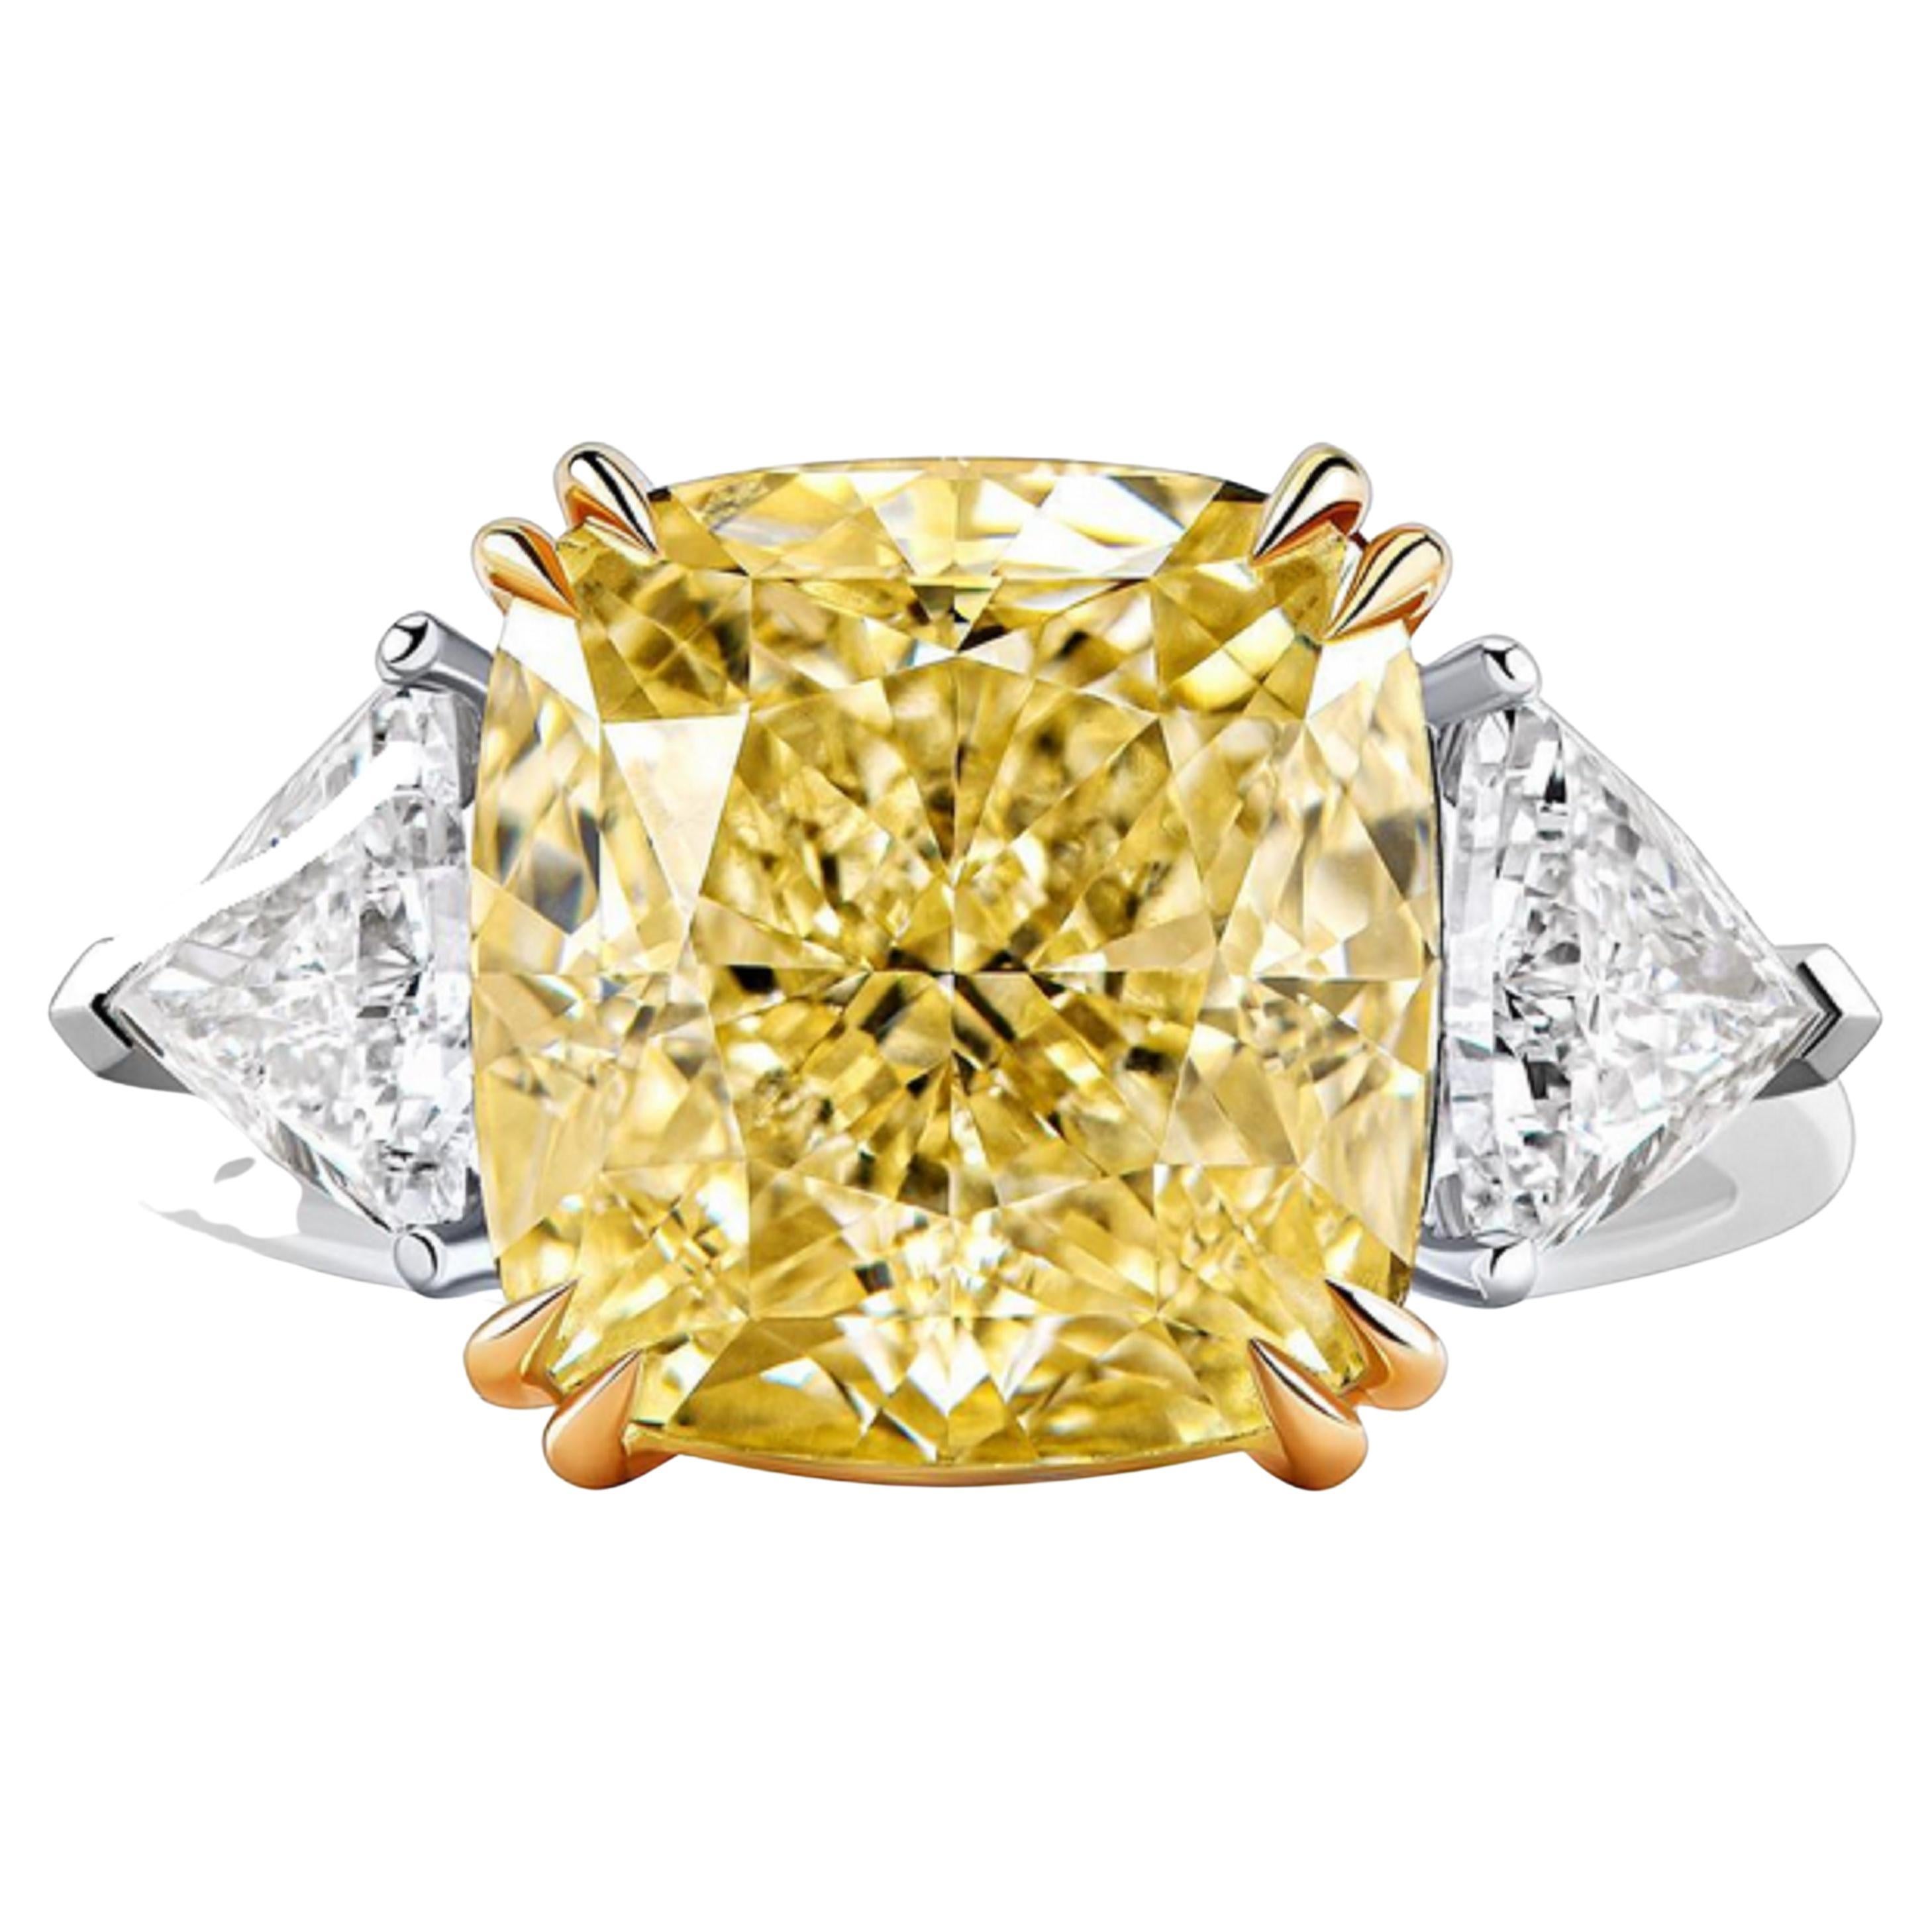 Introducing the exquisite GIA Certified 5.15 Carat Fancy Yellow Diamond Ring, embellished with two trillions on each side. This exceptional ring showcases a stunning fancy yellow diamond, certified by the esteemed Gemological Institute of America